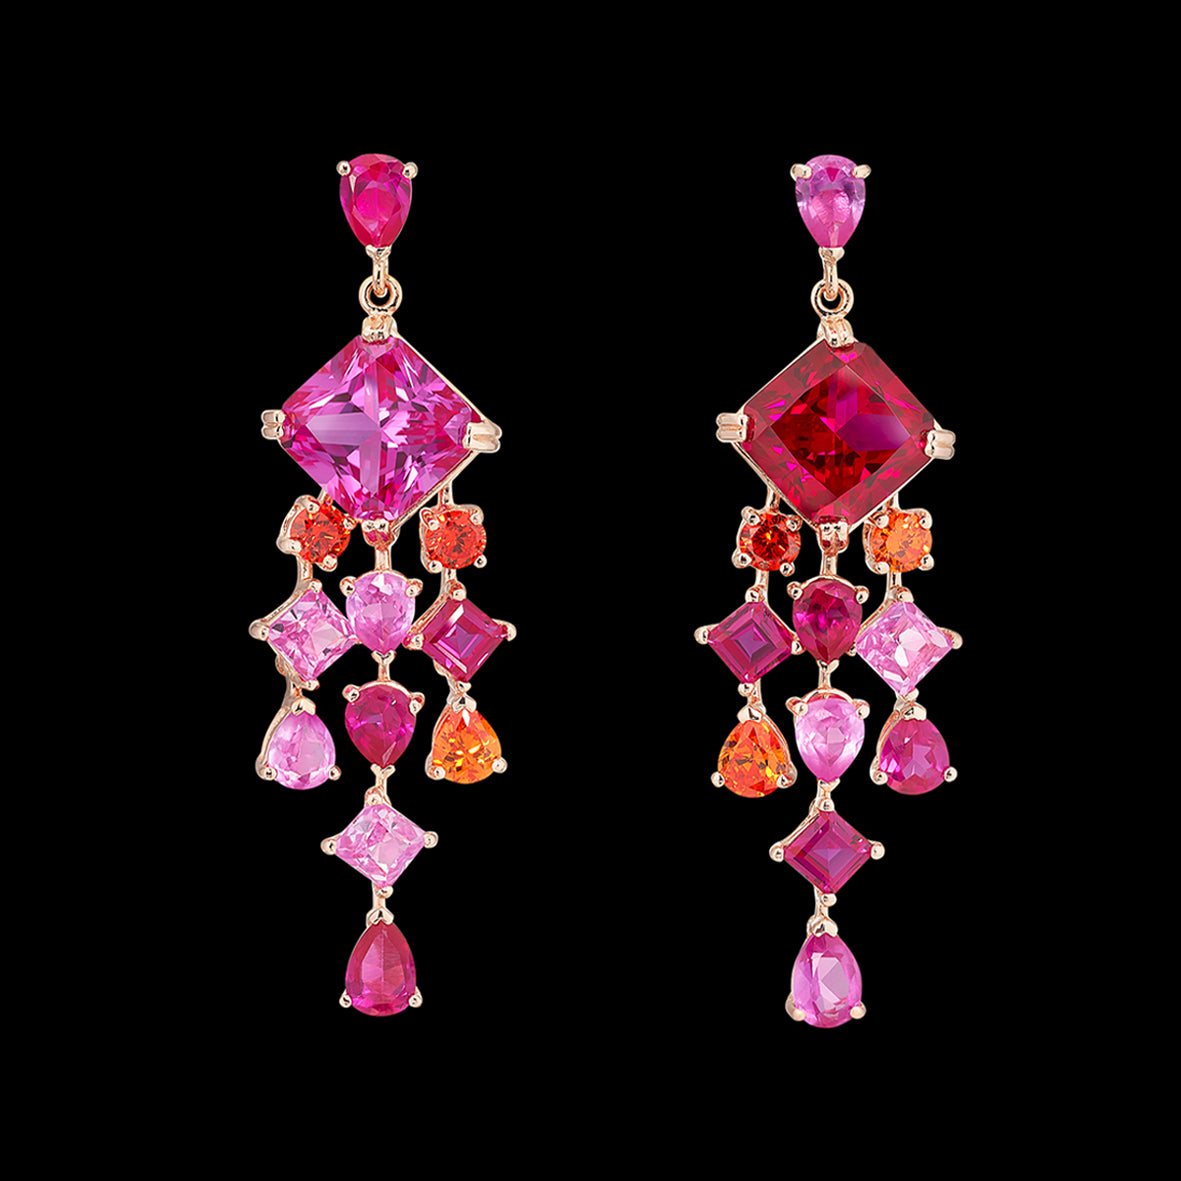 Ruby Asscher Drop Earrings, Earring, Anabela Chan Joaillerie - Fine jewelry with laboratory grown and created gemstones hand-crafted in the United Kingdom. Anabela Chan Joaillerie is the first fine jewellery brand in the world to champion laboratory-grown and created gemstones with high jewellery design, artisanal craftsmanship and a focus on ethical and sustainable innovations.